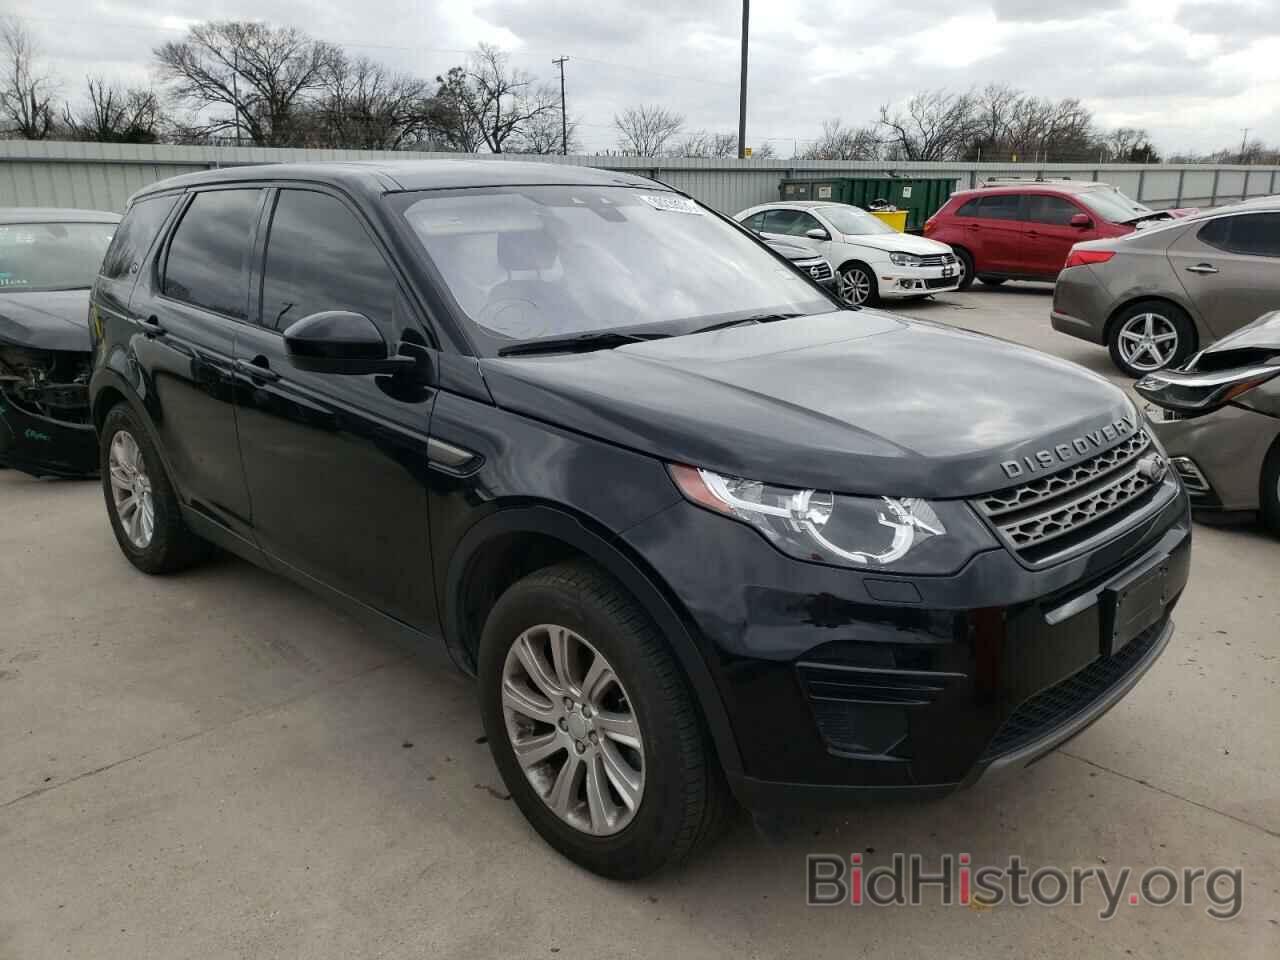 Фотография SALCP2RX8JH727726 - LAND ROVER DISCOVERY 2018